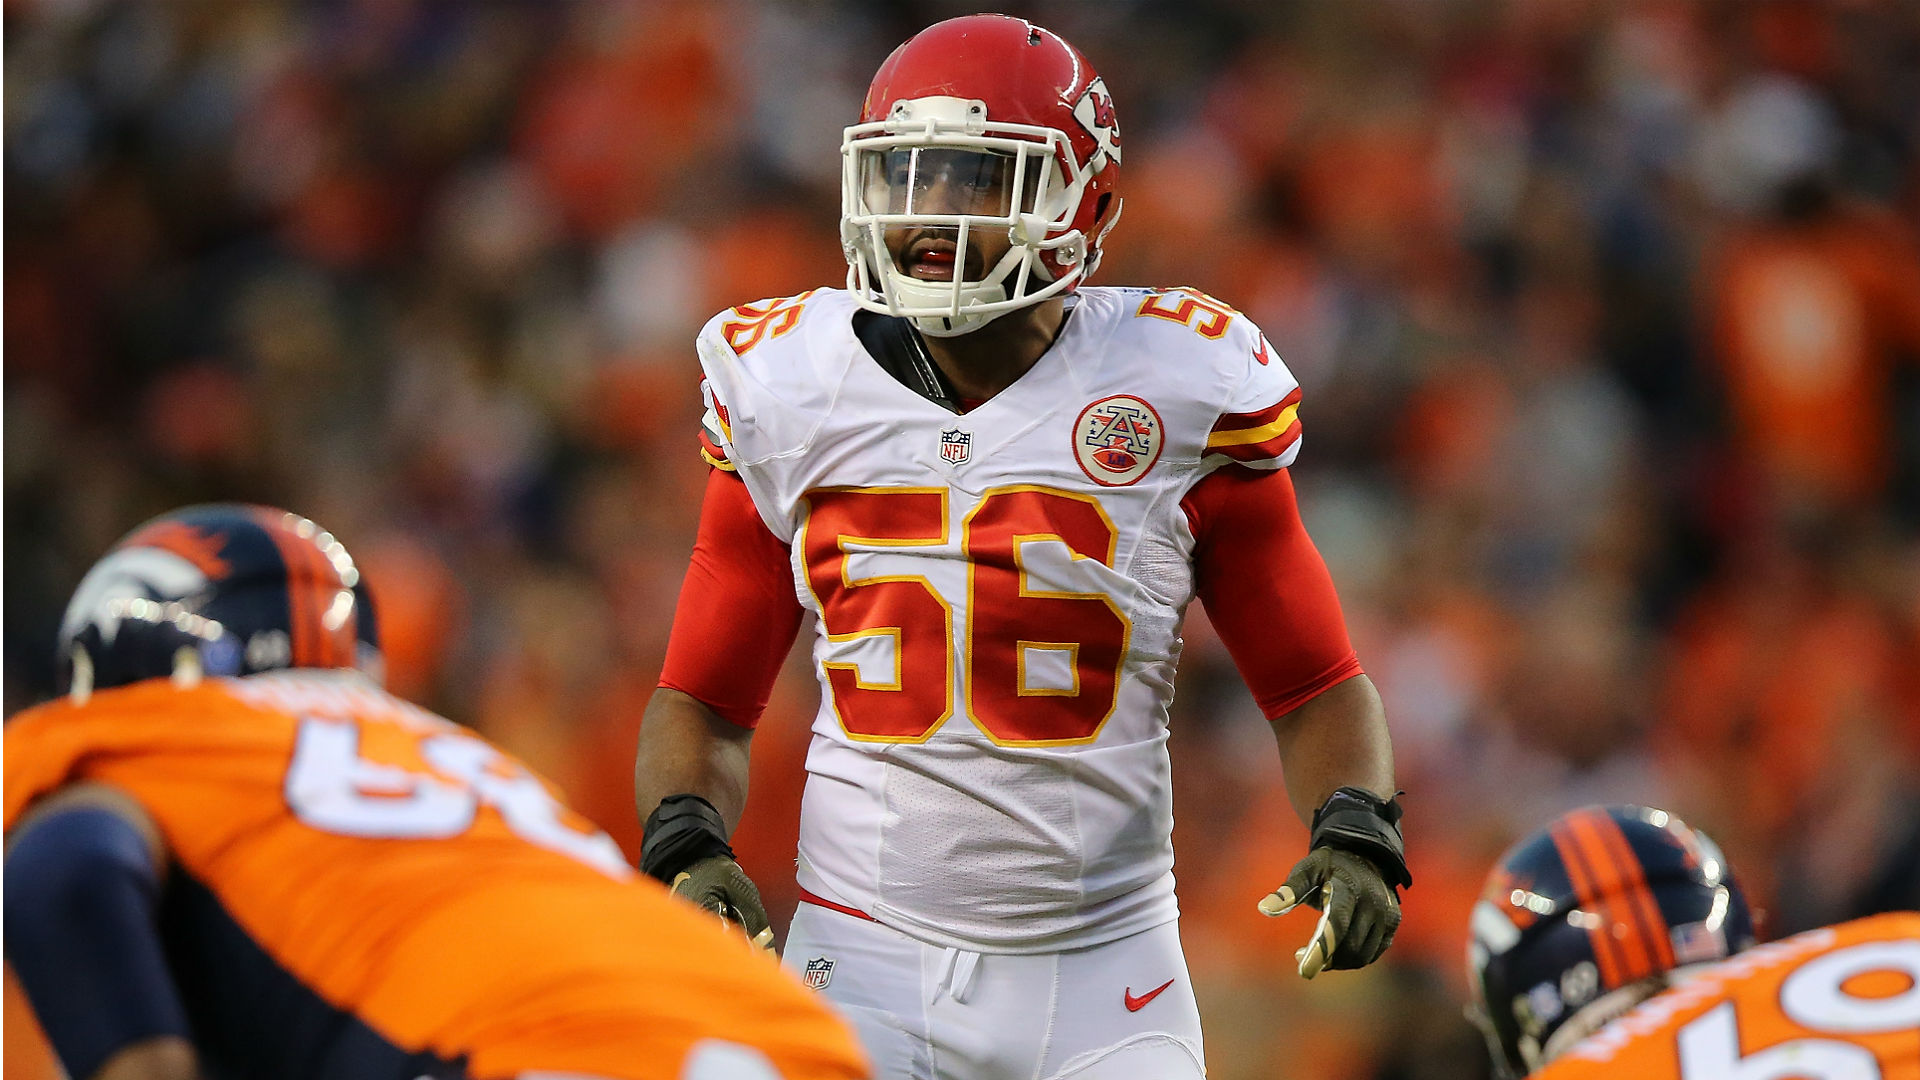 Derrick Johnson to sign 1-day deal to retire with Chiefs